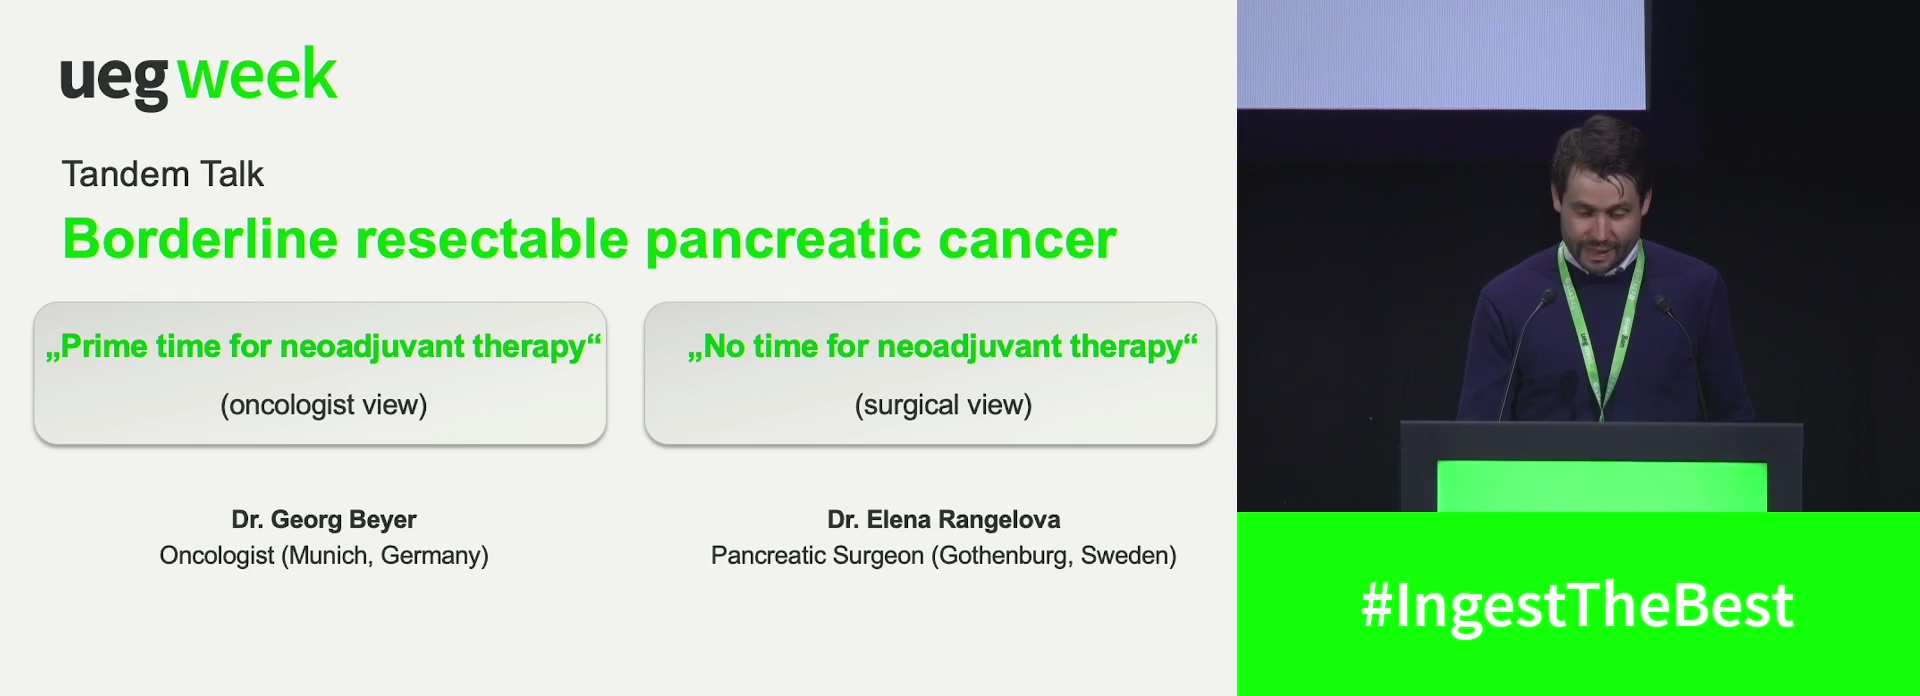 Borderline resectable pancreatic cancer: Prime time for neoadjuvant treatment (oncologist view)